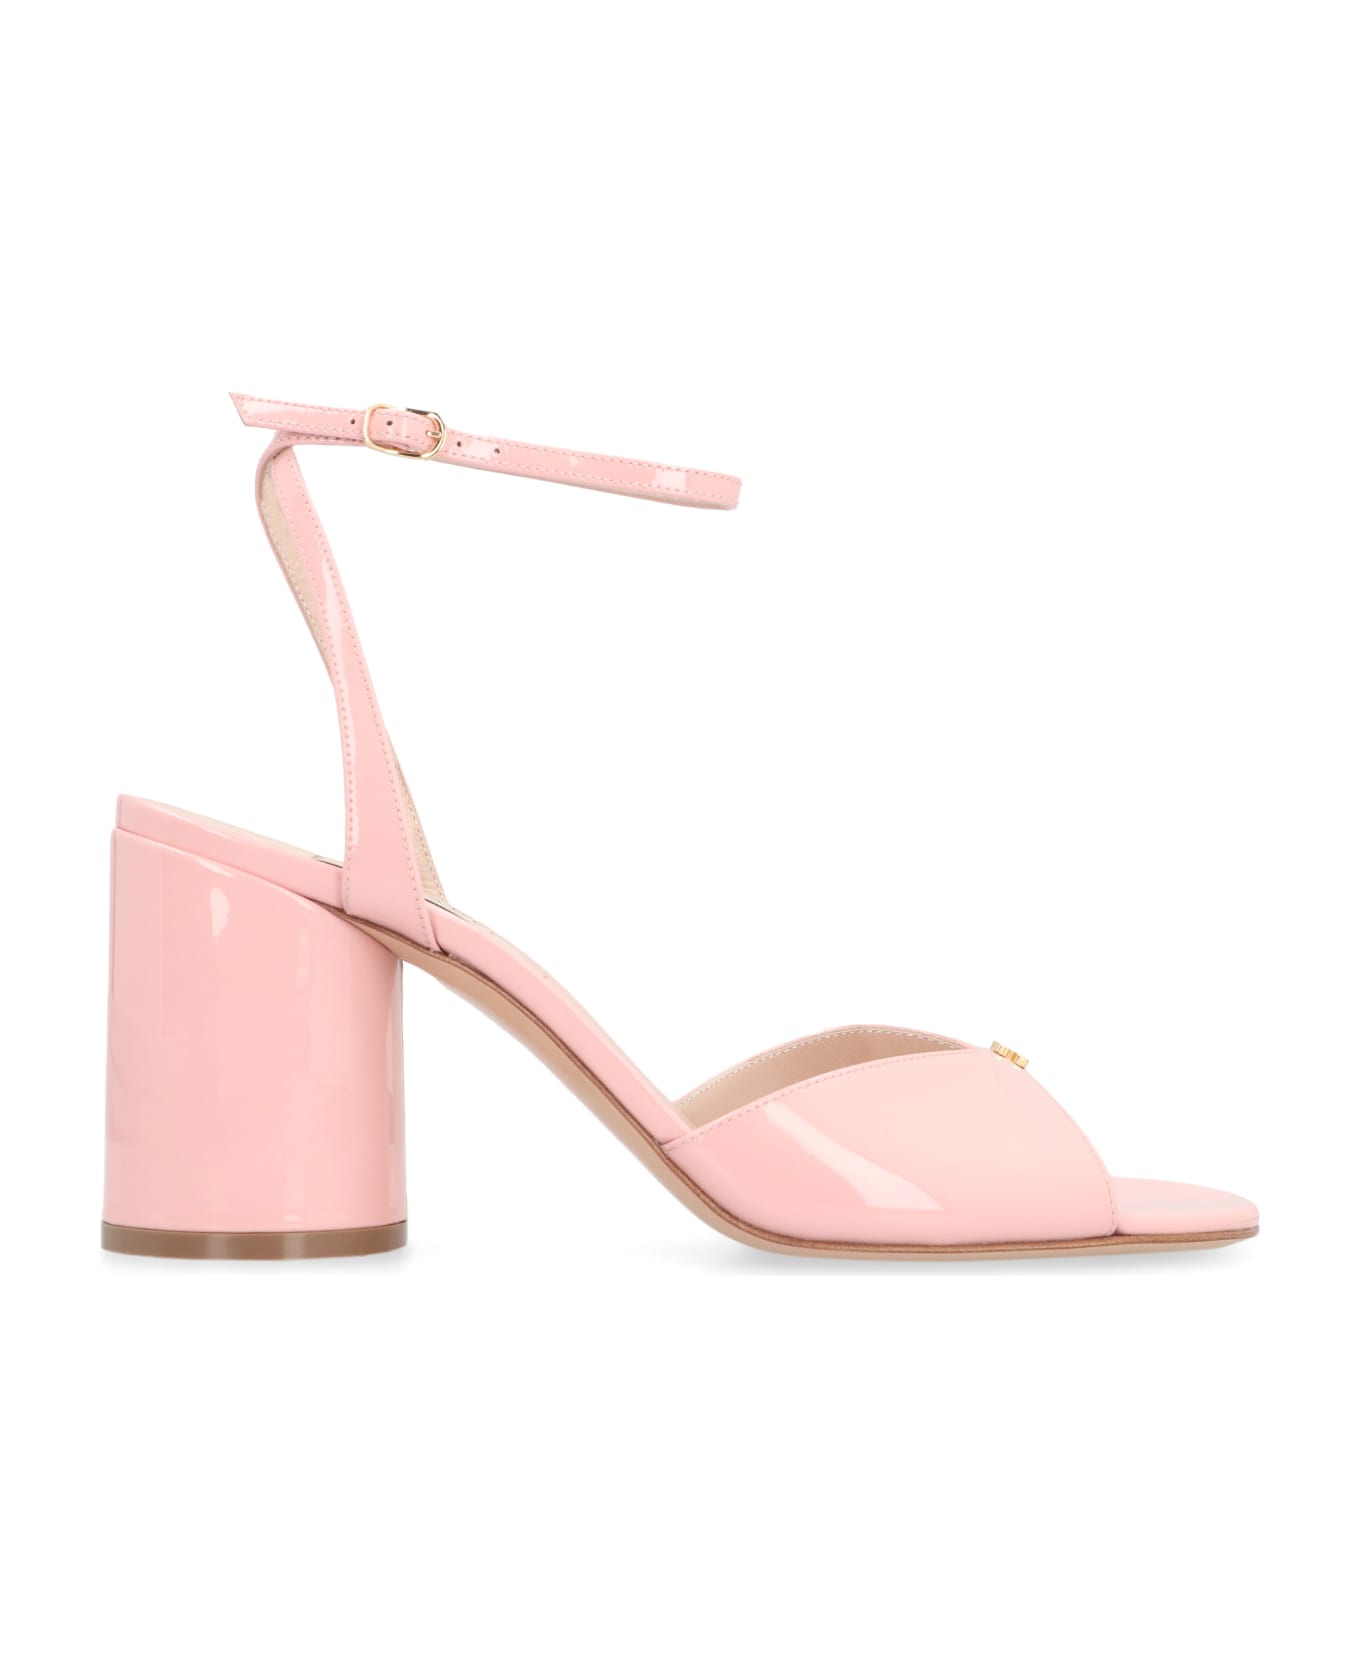 Casadei Tiffany Patent Leather Sandals - Pink